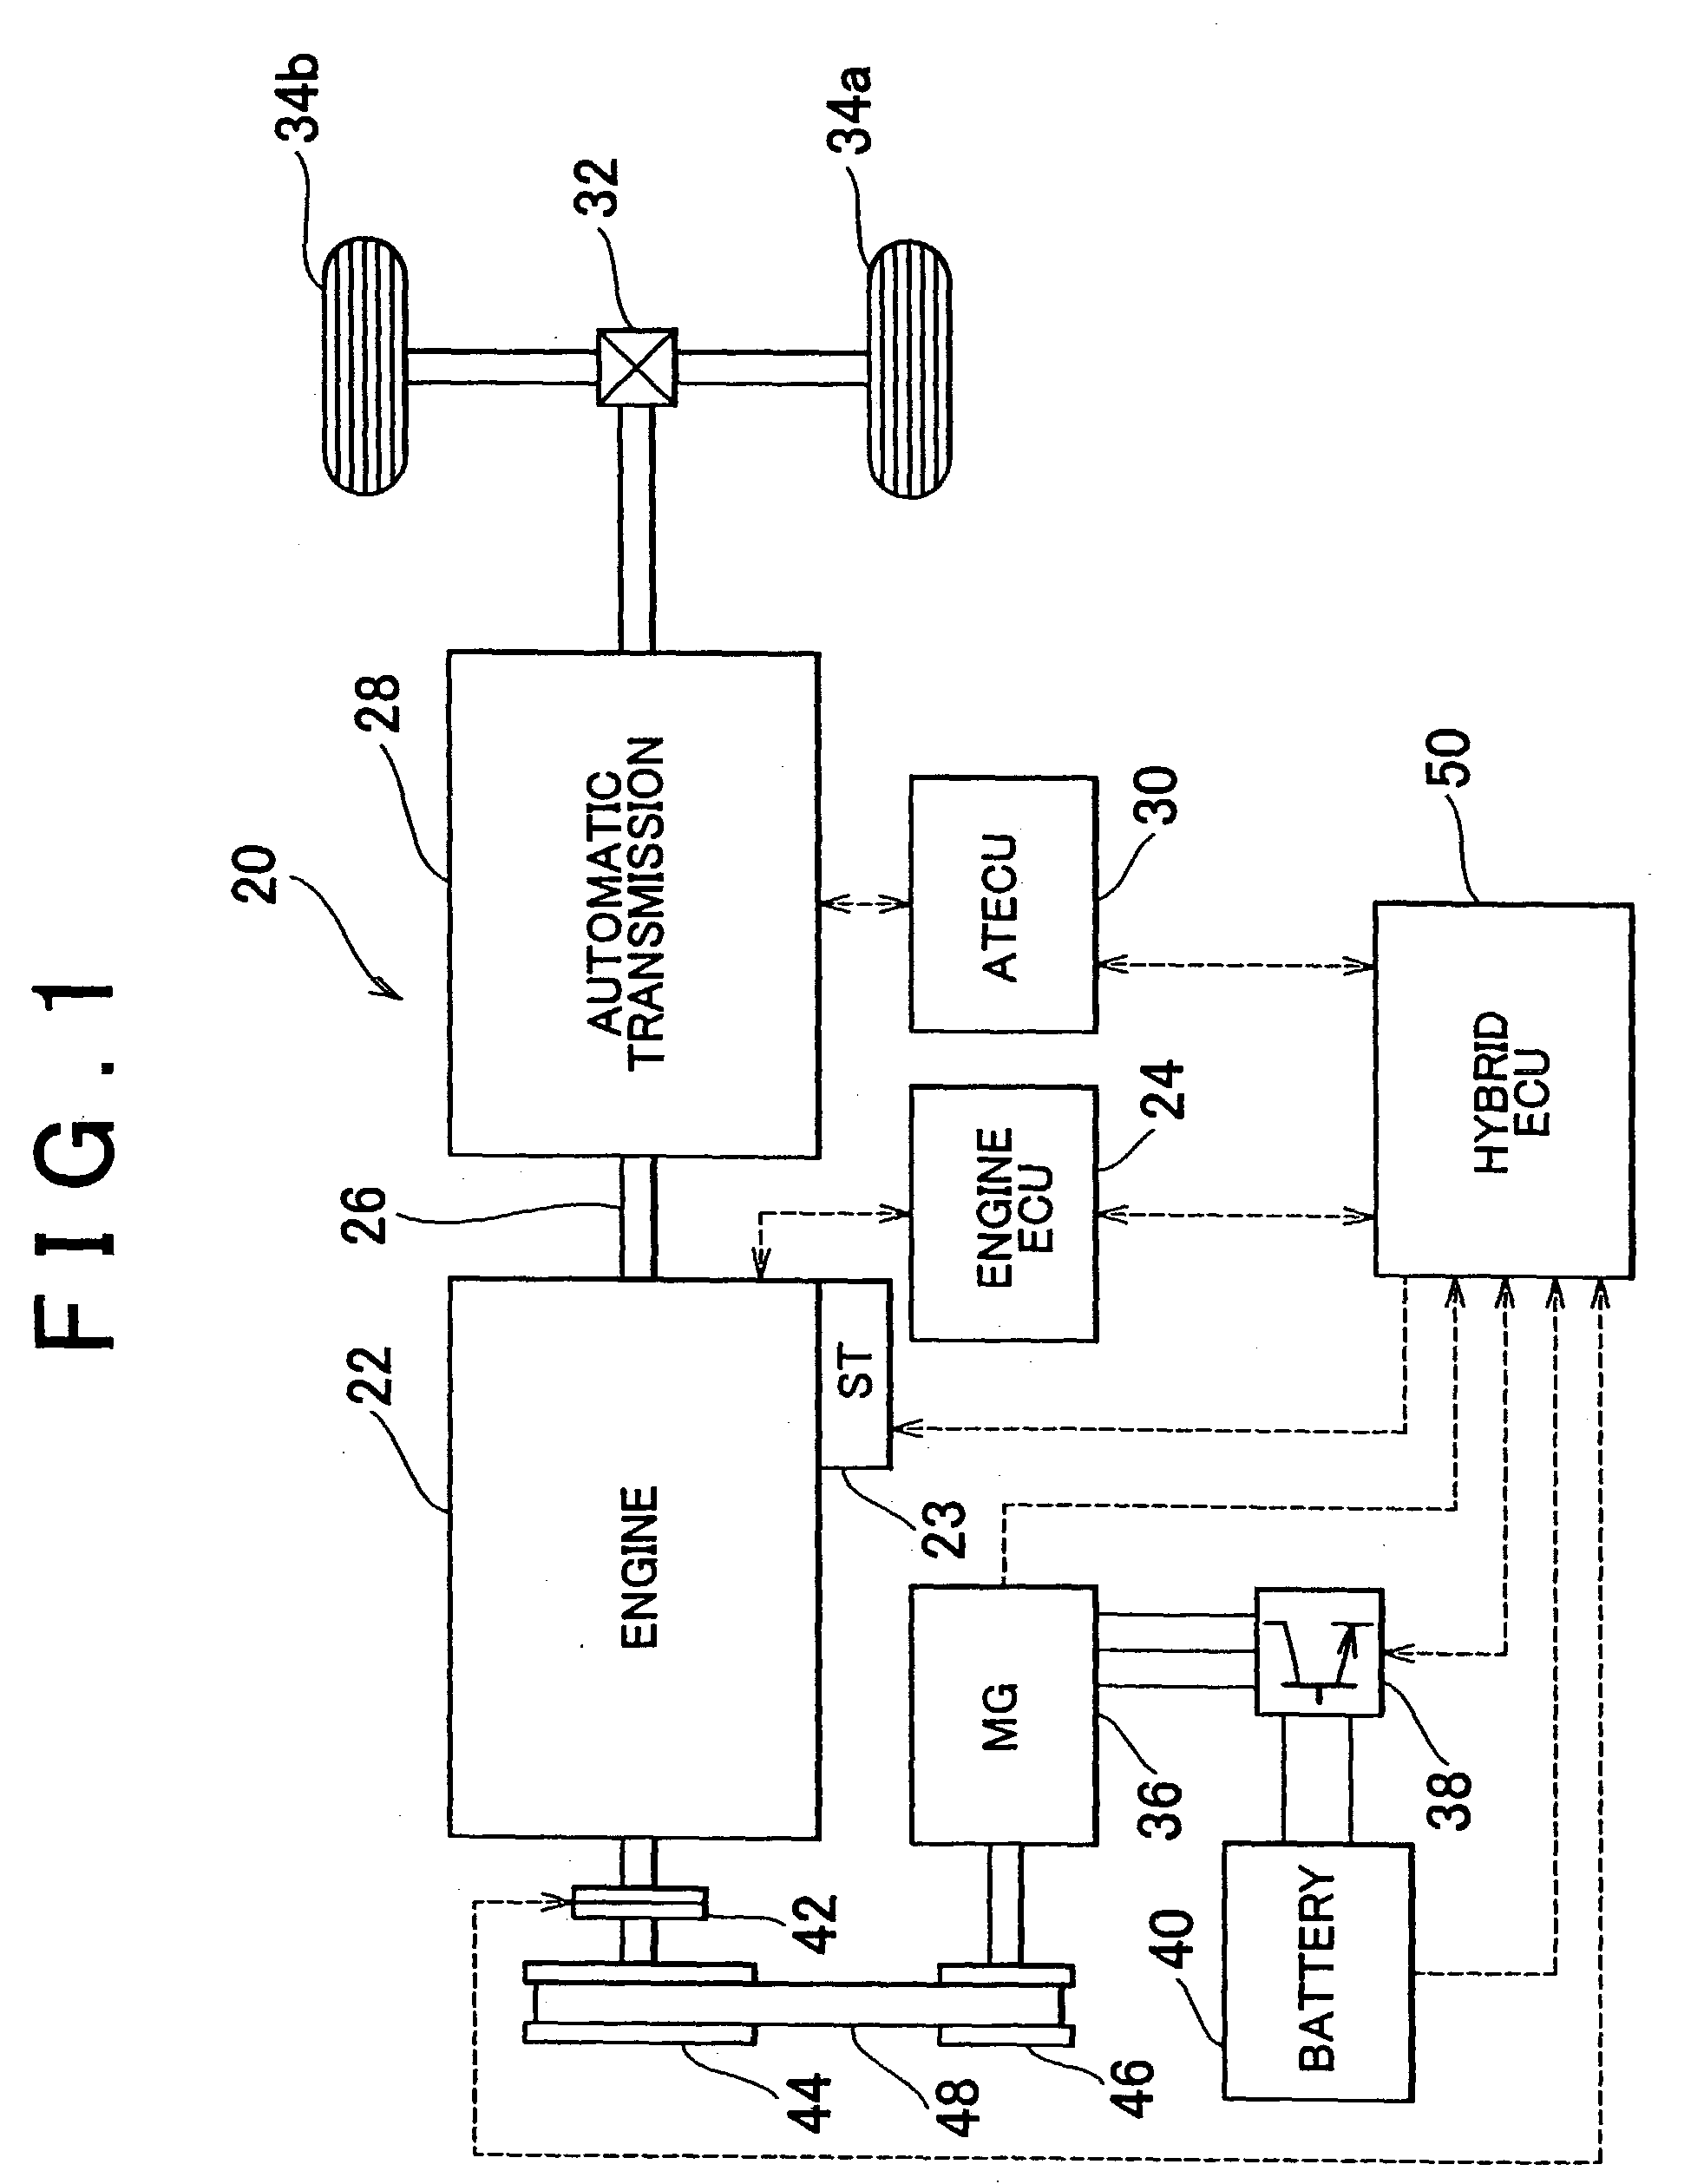 Control system and method for motor vehicles